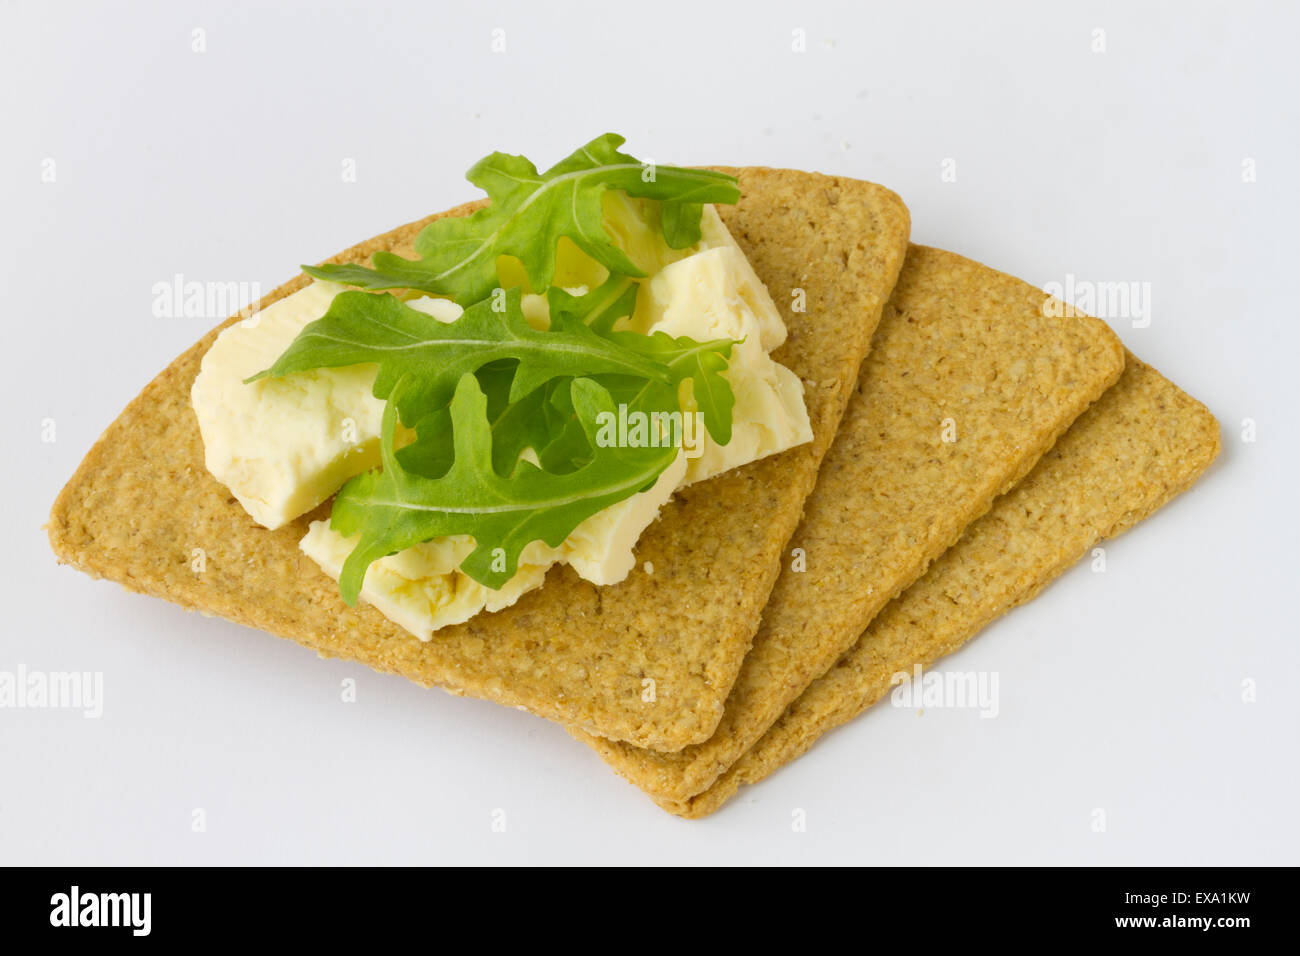 Oatcake with cheese Stock Photo